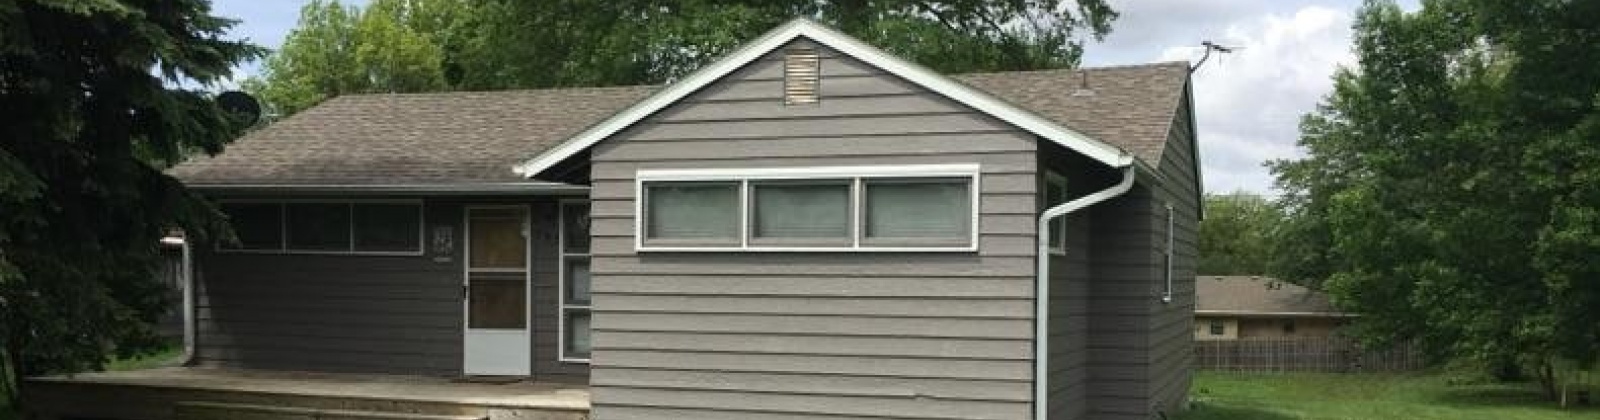 505 Russell St,Firth,NE,68358,2 Bedrooms Bedrooms,1 BathroomBathrooms,House,505 Russell St,1013